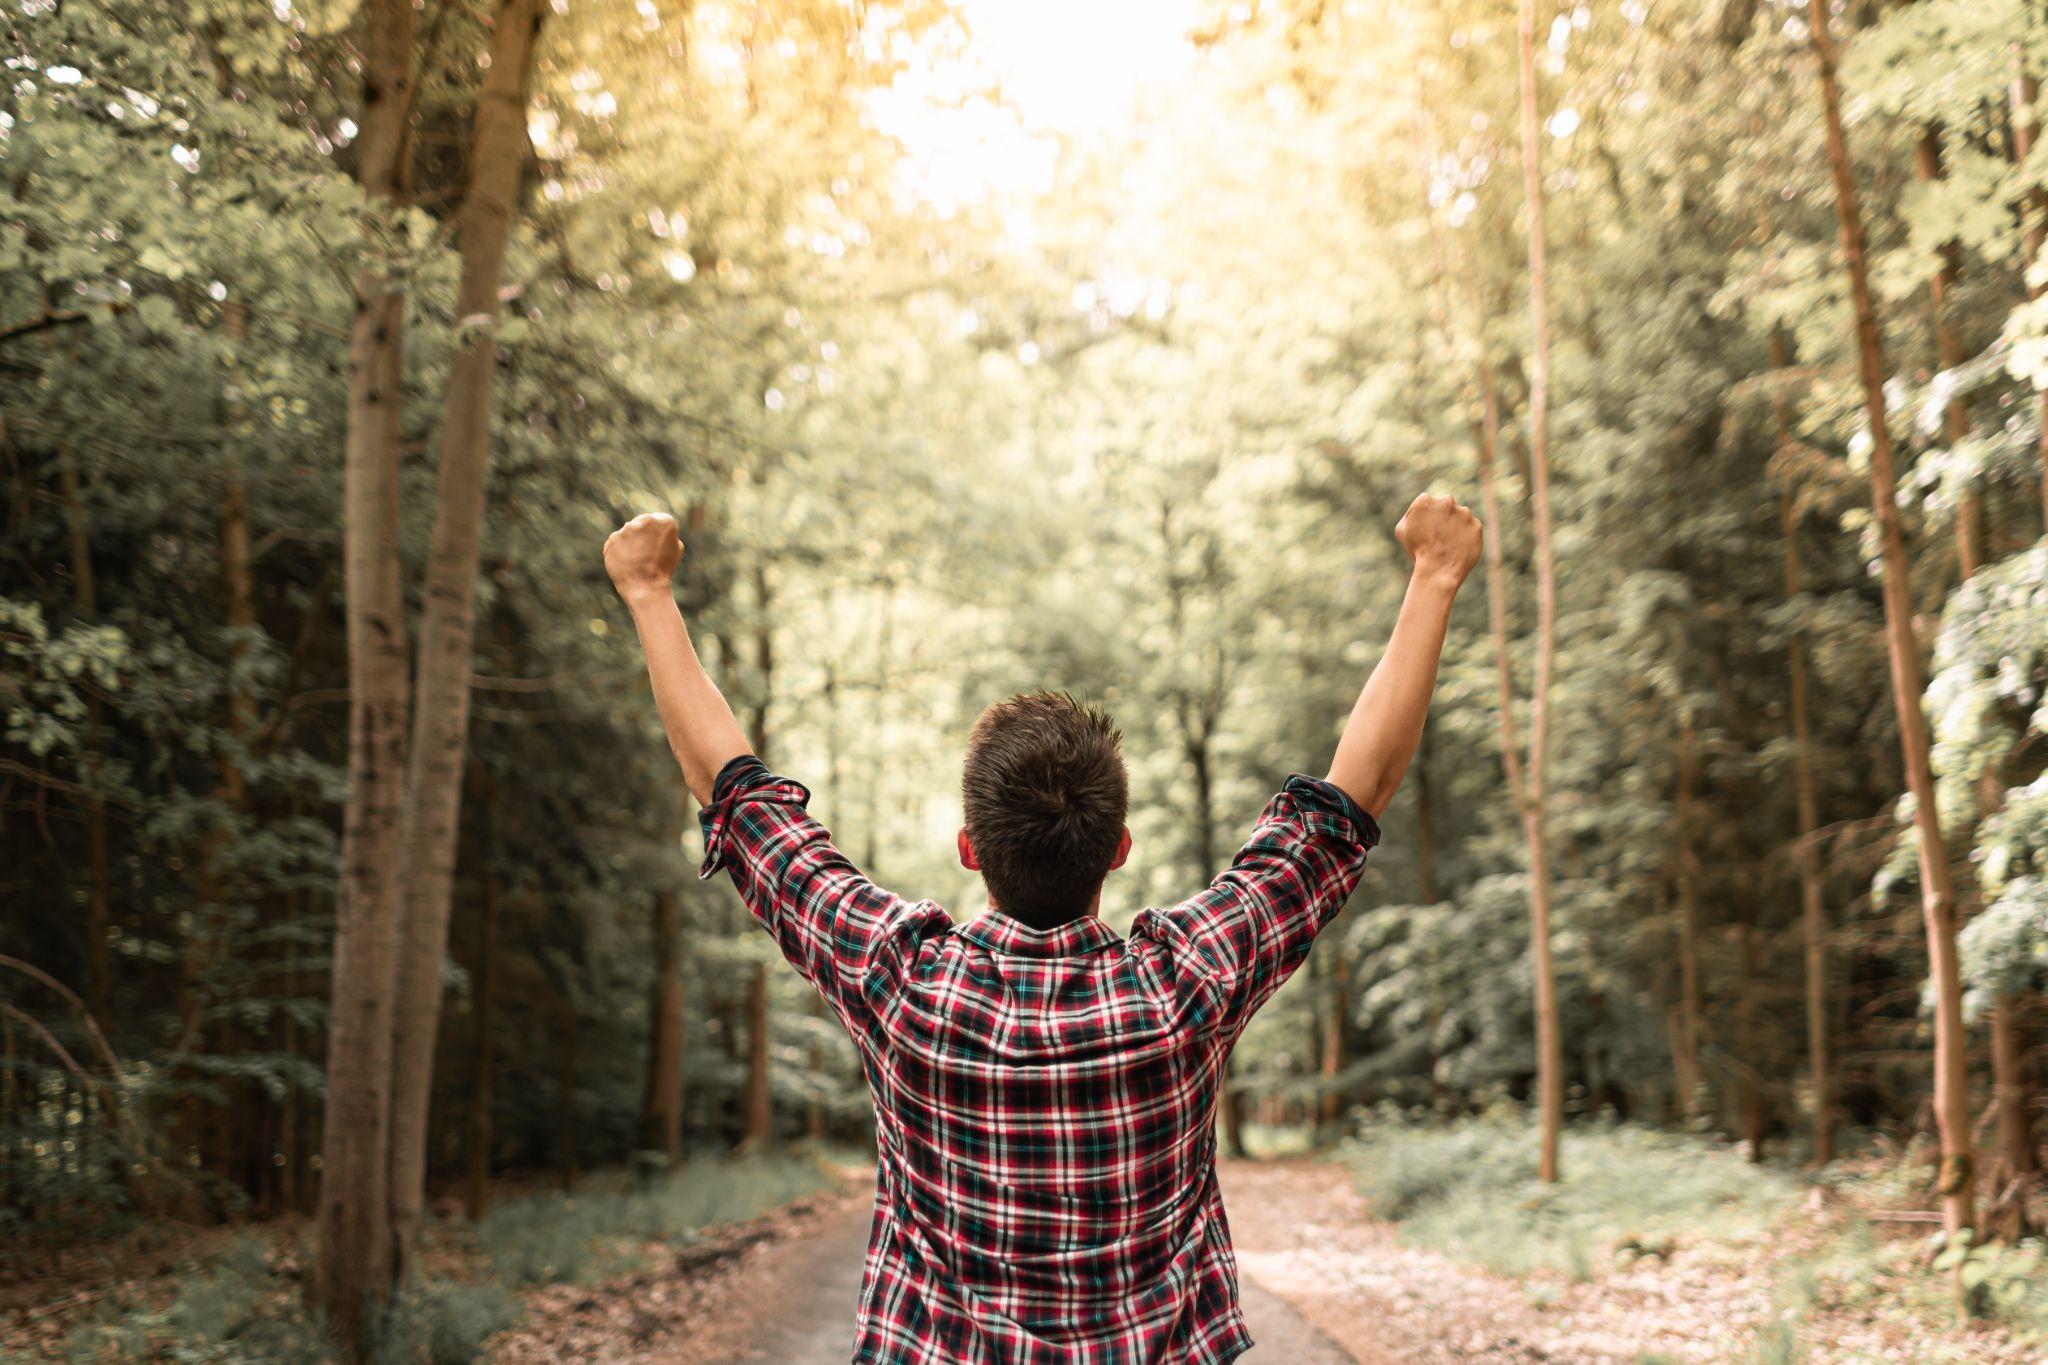 Happy strong young man with raised arm raised in autumn forest surrounded by beautiful nature